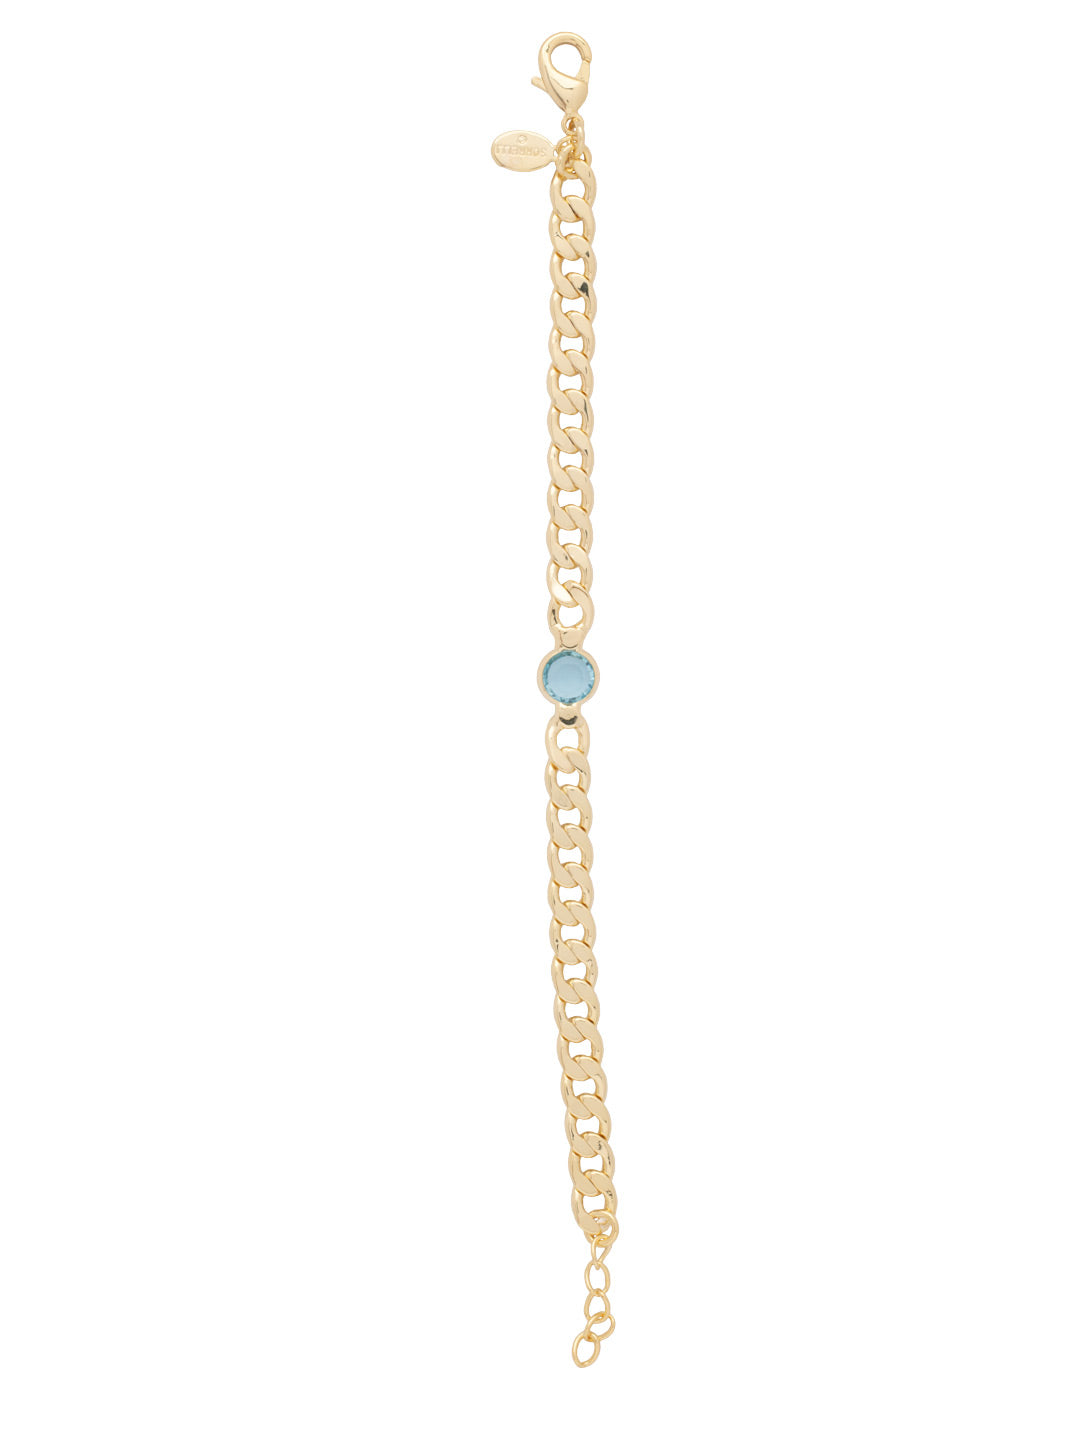 Dewdrop Tennis Bracelet - BFK2BGAQU - <p>The Dewdrop Tennis Bracelet features a single clear cut channel on an adjustable curb chain, secured with a lobster claw clasp. From Sorrelli's Aquamarine collection in our Bright Gold-tone finish.</p>